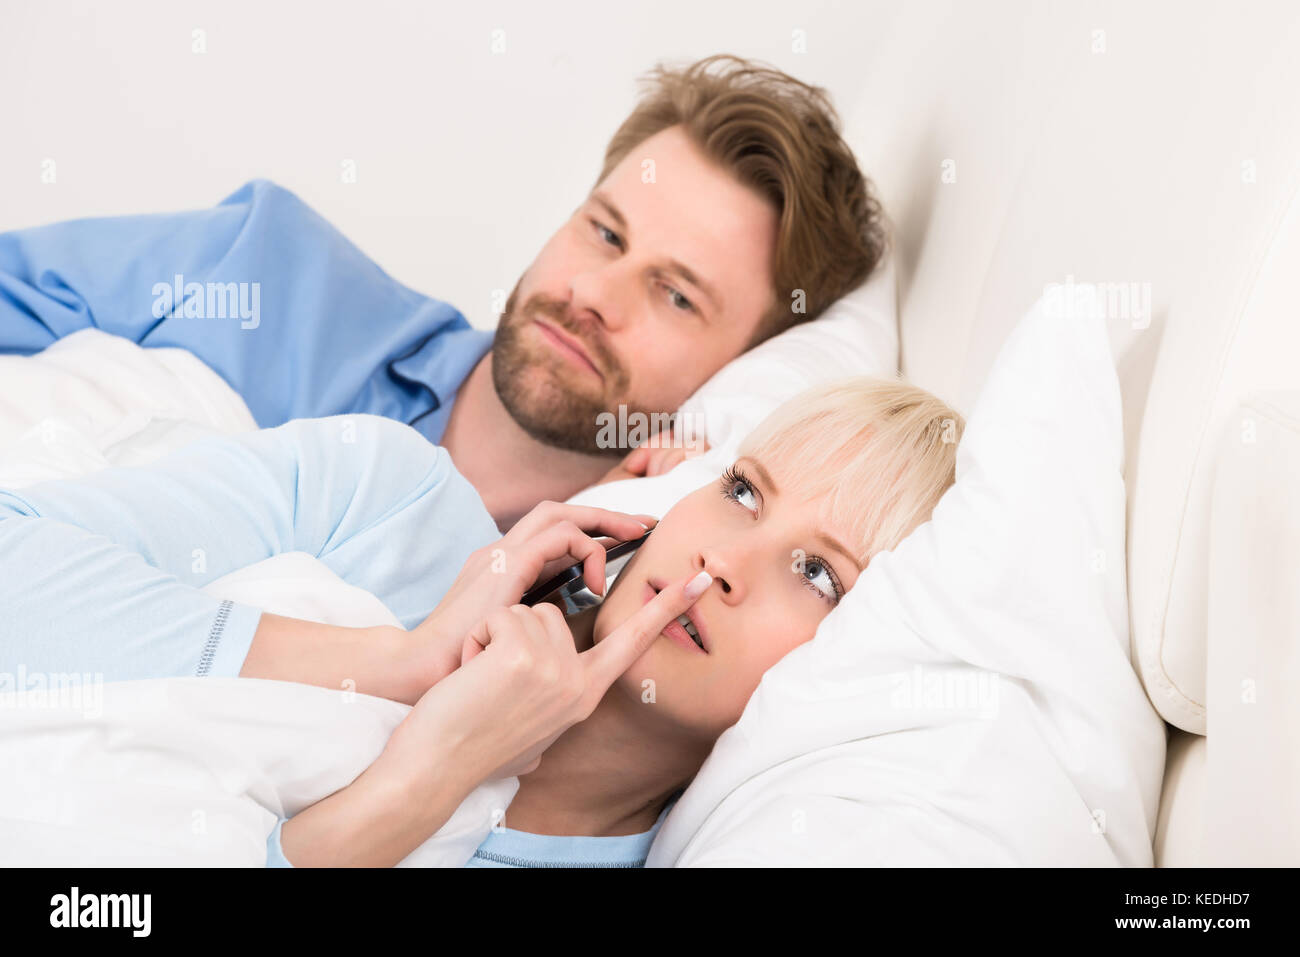 Young Man Looking At Woman Talking On Mobile Phone In Bedroom At Home Stock Photo